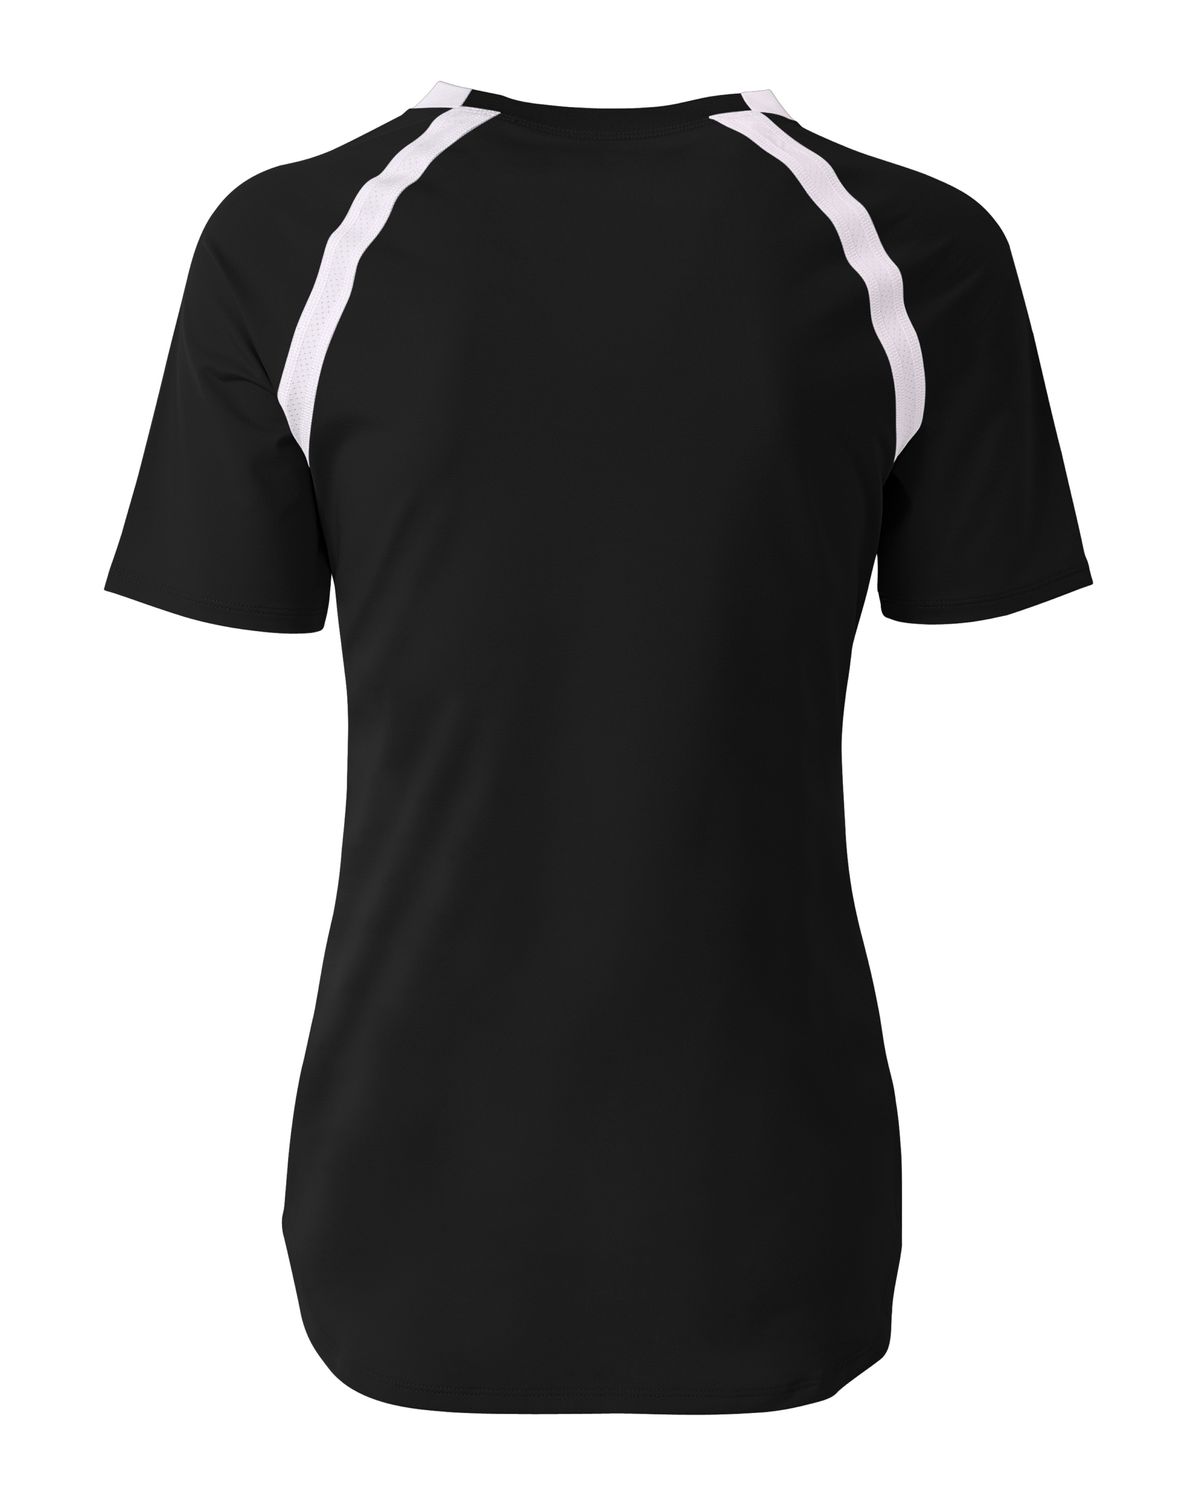 'A4 NG3019 Youth Ace Short Sleeve Volleyball Jer'